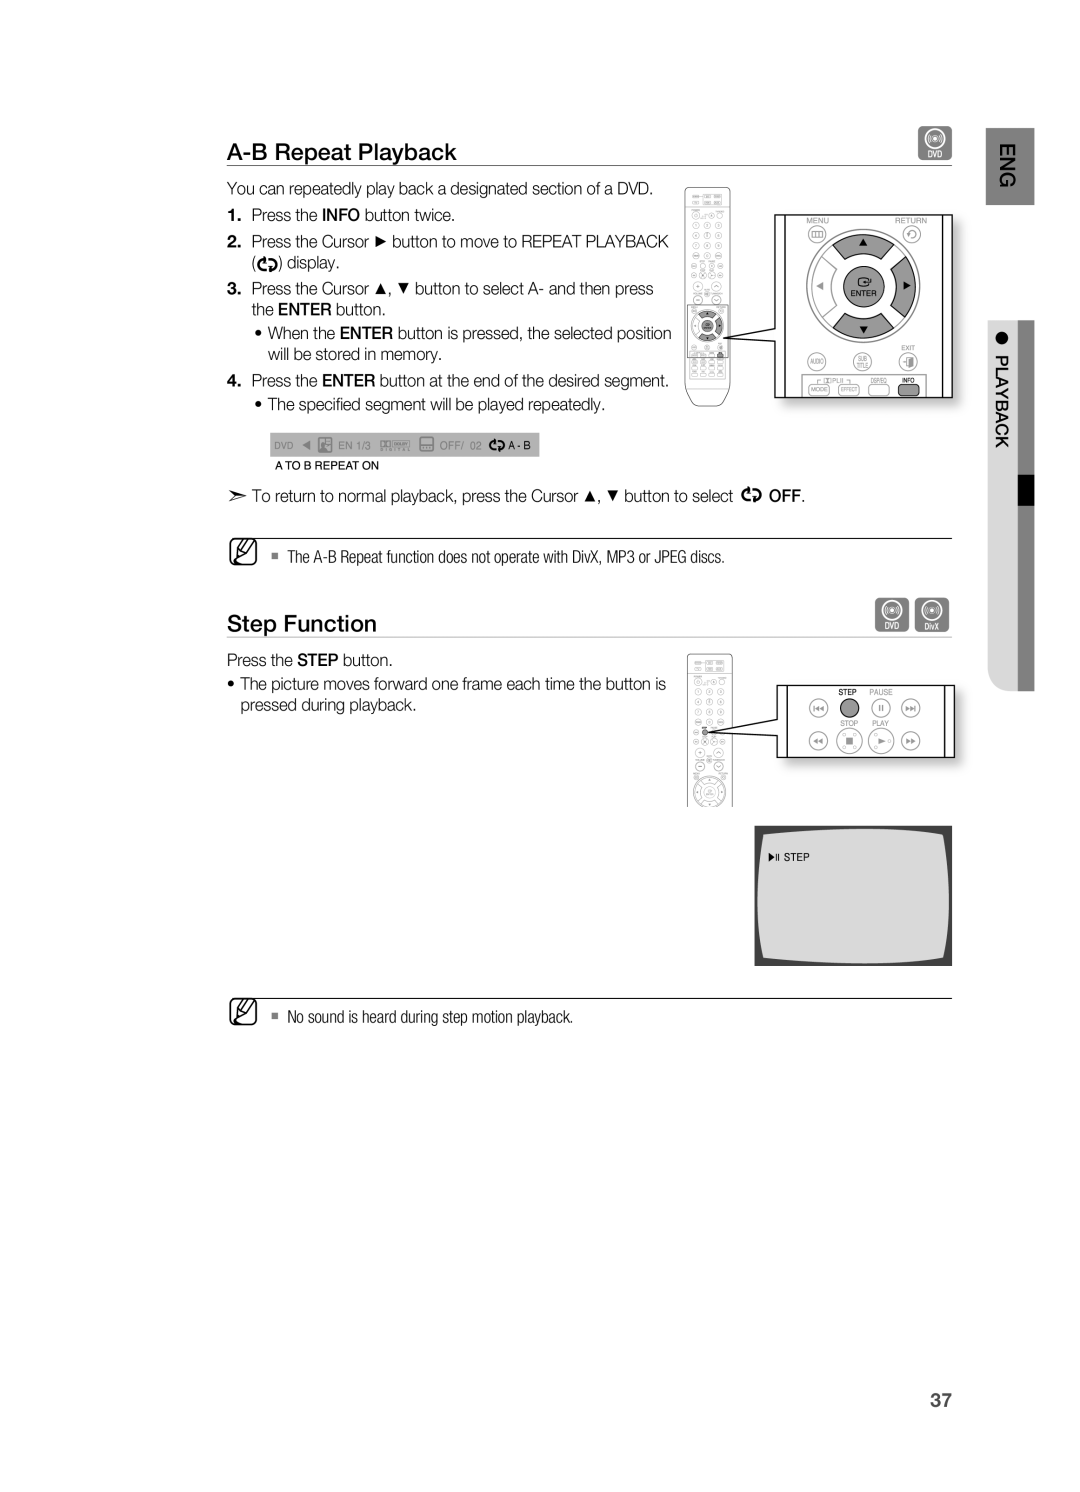 Samsung HT-TX715 user manual A-Brepeat Playback, Step Function 